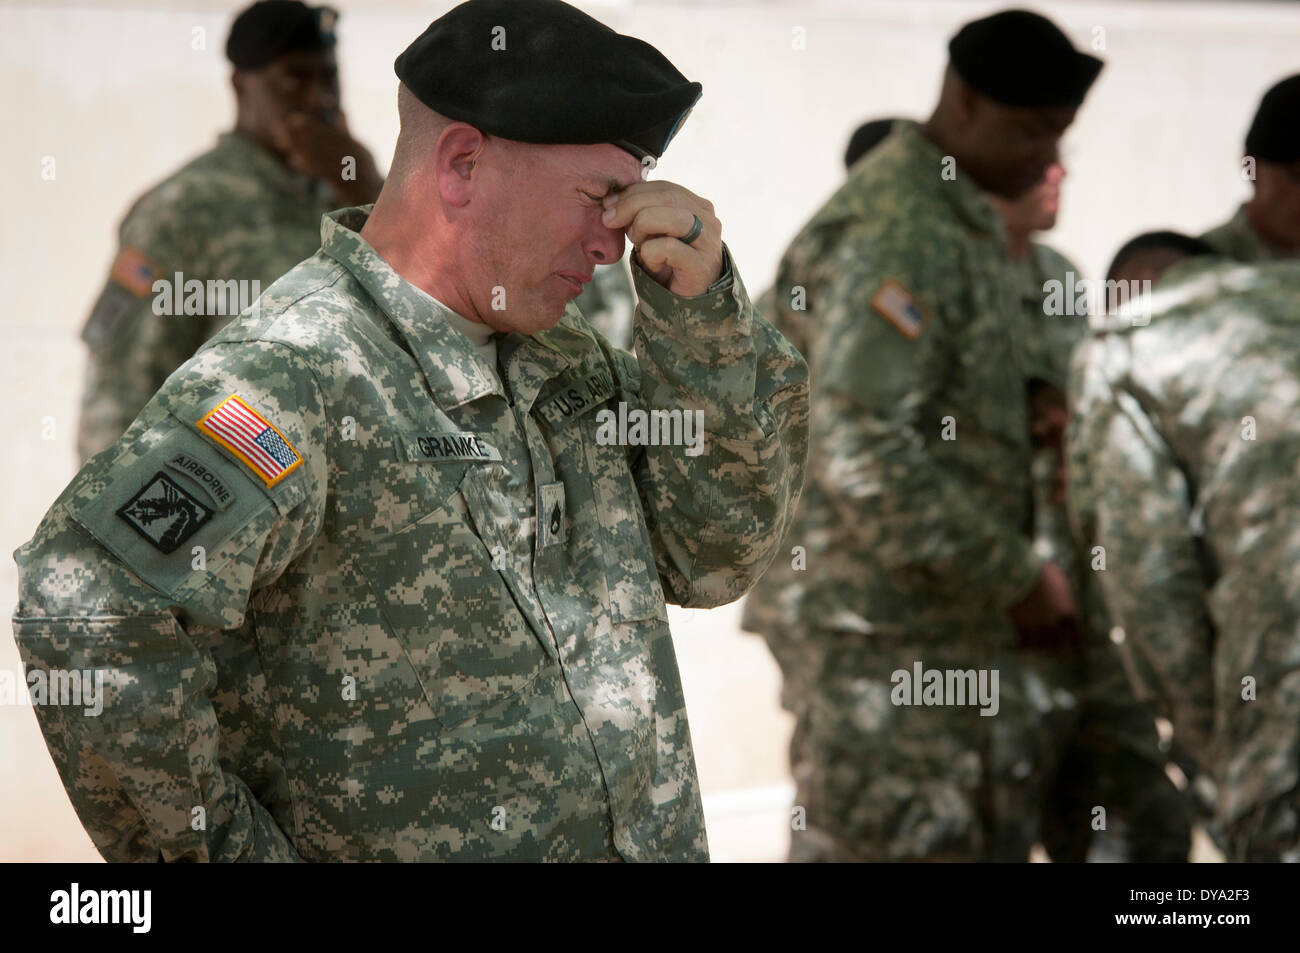 Staff Sgt. Jerry Gramke breaks down during the memorial service for the soldiers killed in a shooting rampage at Fort Hood April 9, 2014 in Fort Hood, Texas. All three Soldiers were killed in the April 2 shooting by a fellow soldier. Stock Photo